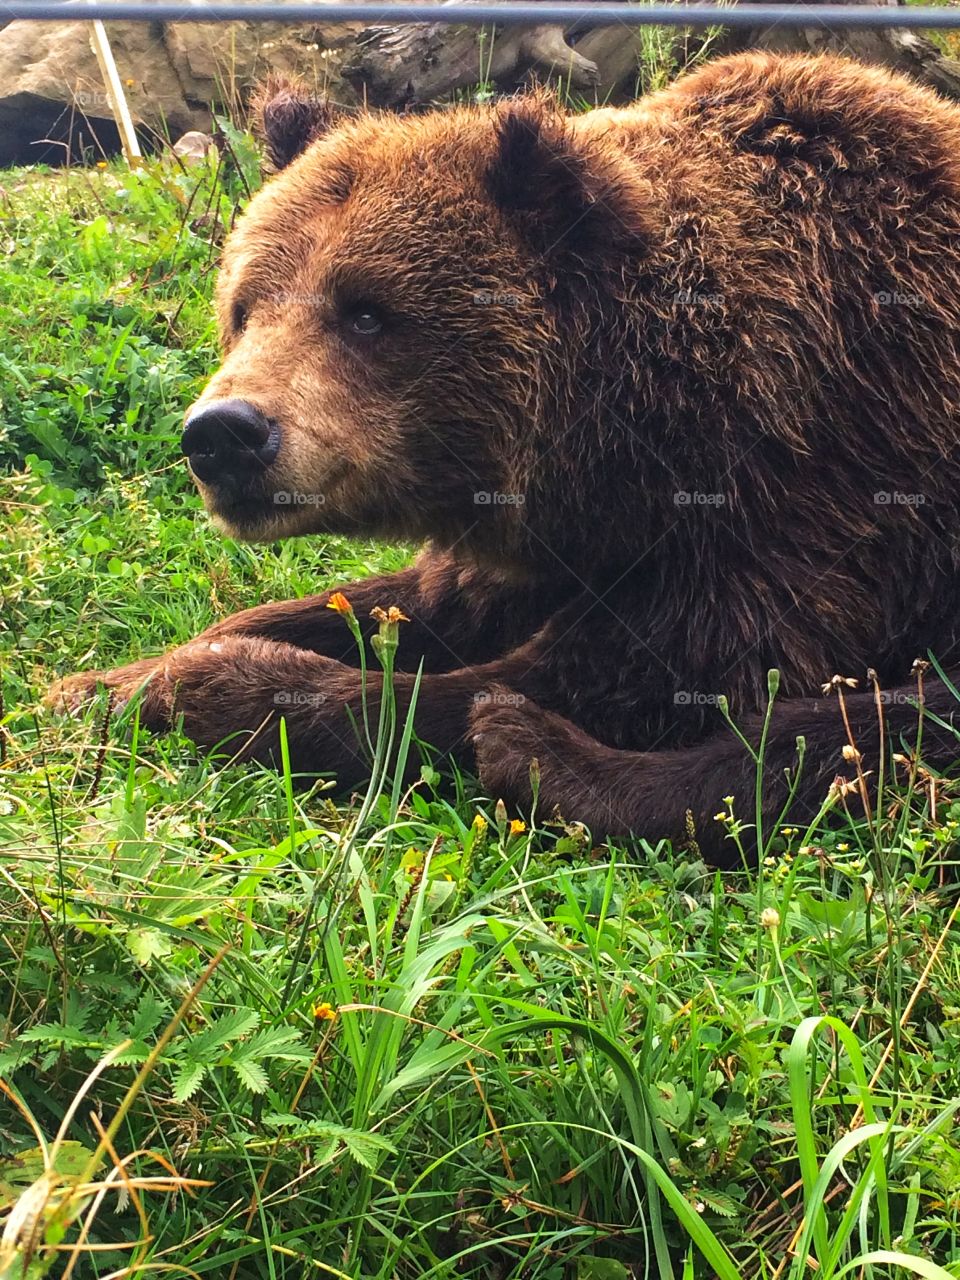 There is a special bear rehabilitation center in Ukraine. Bears from circuses or shot by hunters, they found help and care here. Just look into that eyes. 